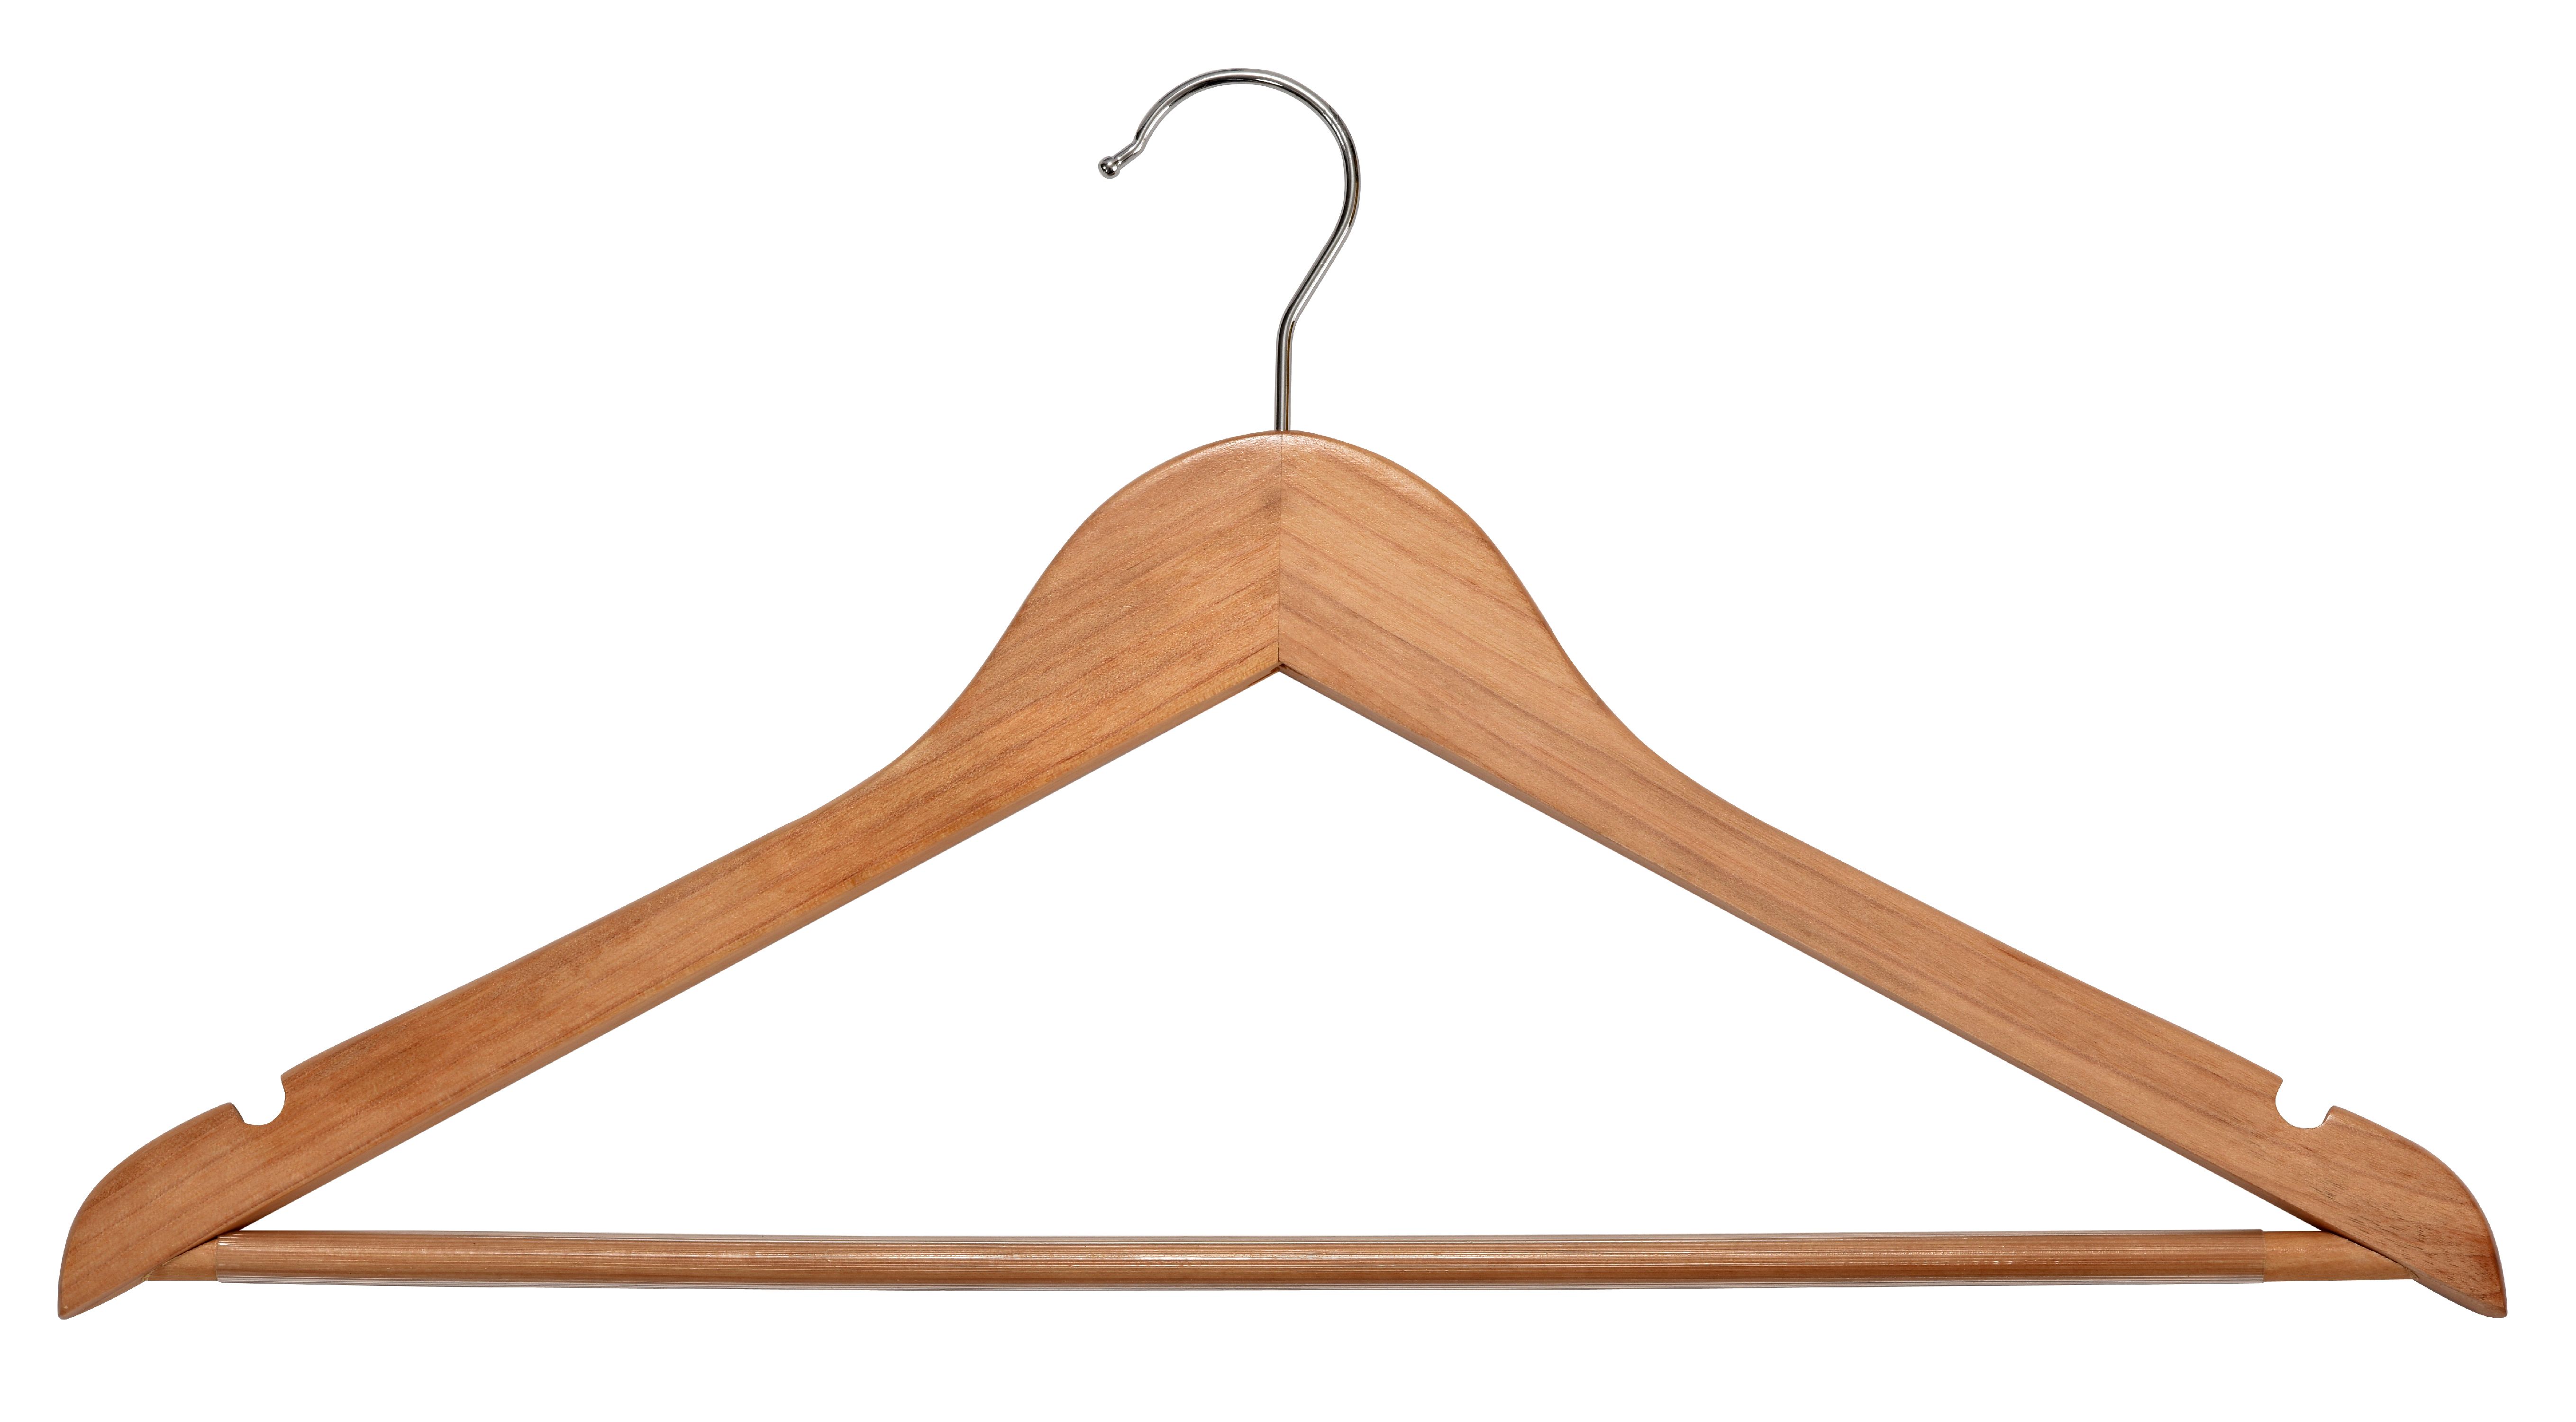 Wood Suit Hangers - 30 Pack, Natural - image 1 of 3